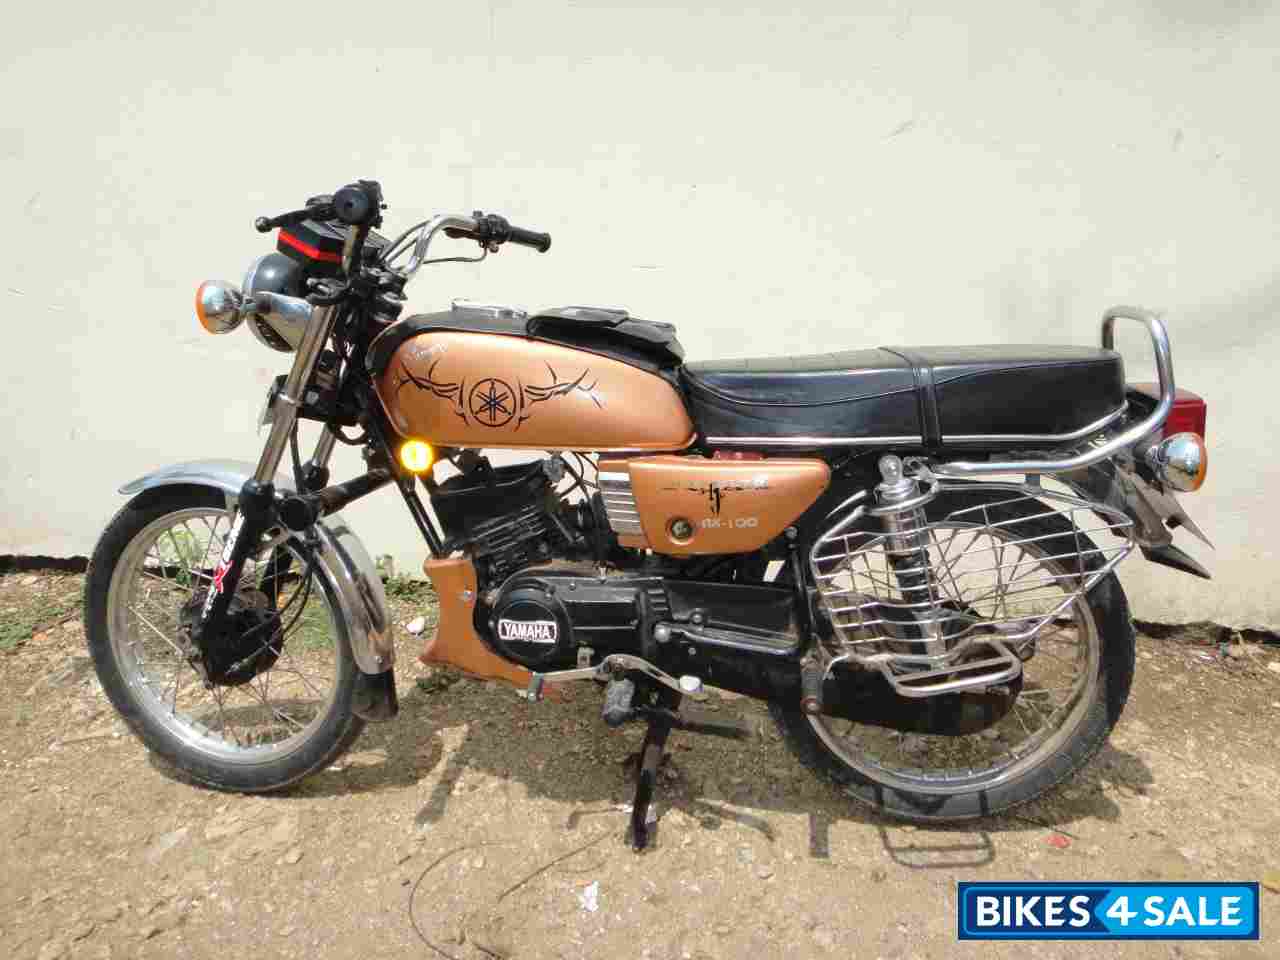 Used 1994 Model Yamaha Rx 100 For Sale In Coimbatore Id Golden Colour Bikes4sale